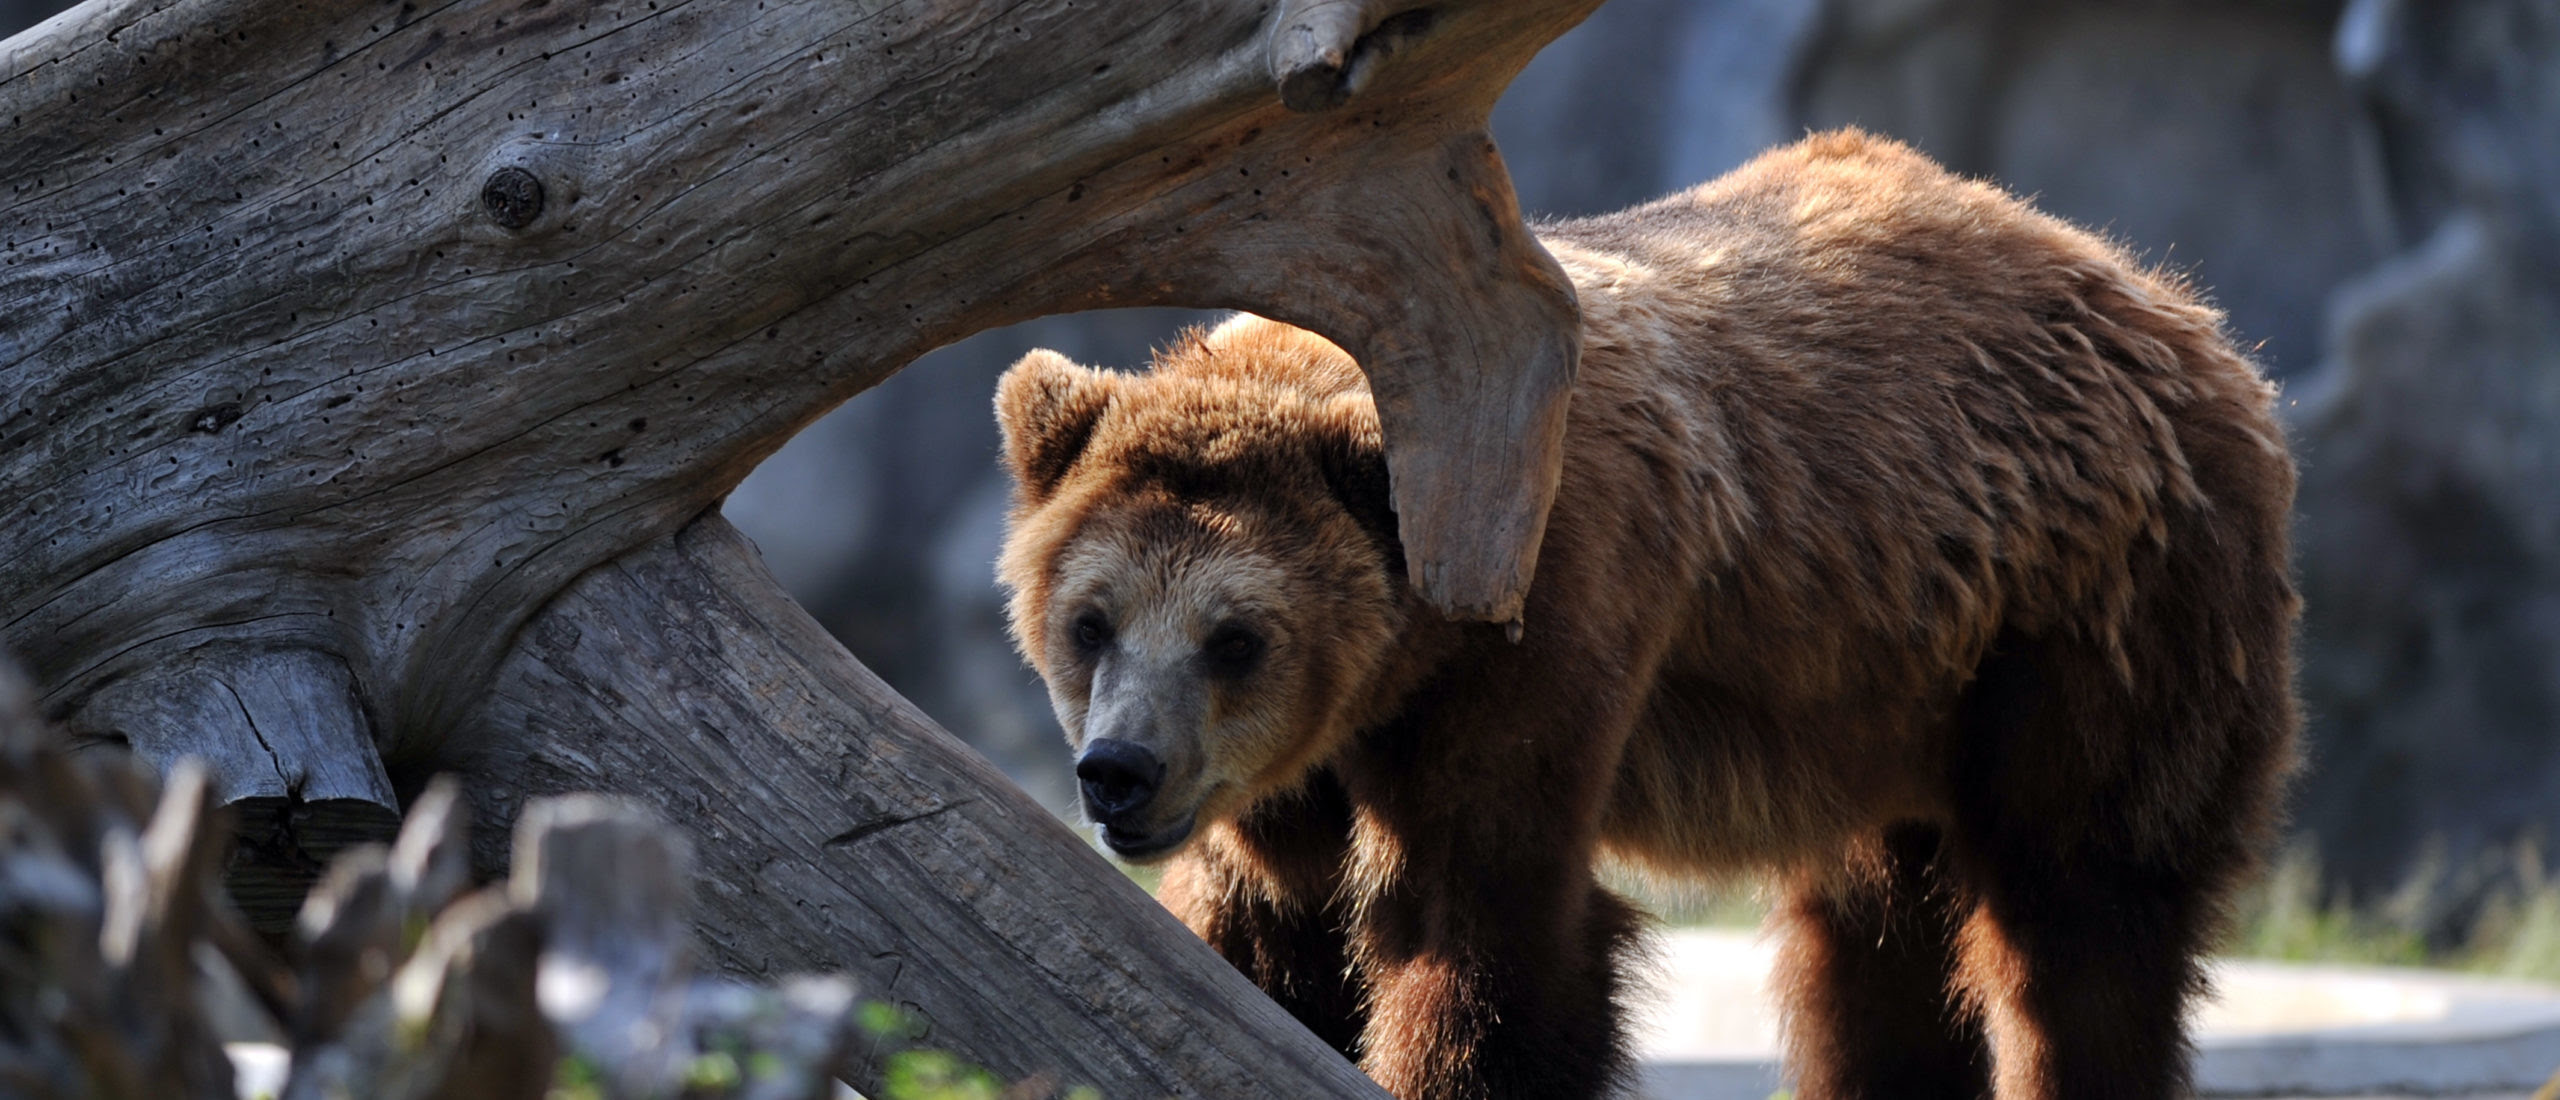 ‘Drenched In Blood’: Grizzly Bear Brutally Attacks 2 College Wrestlers, Both Survive